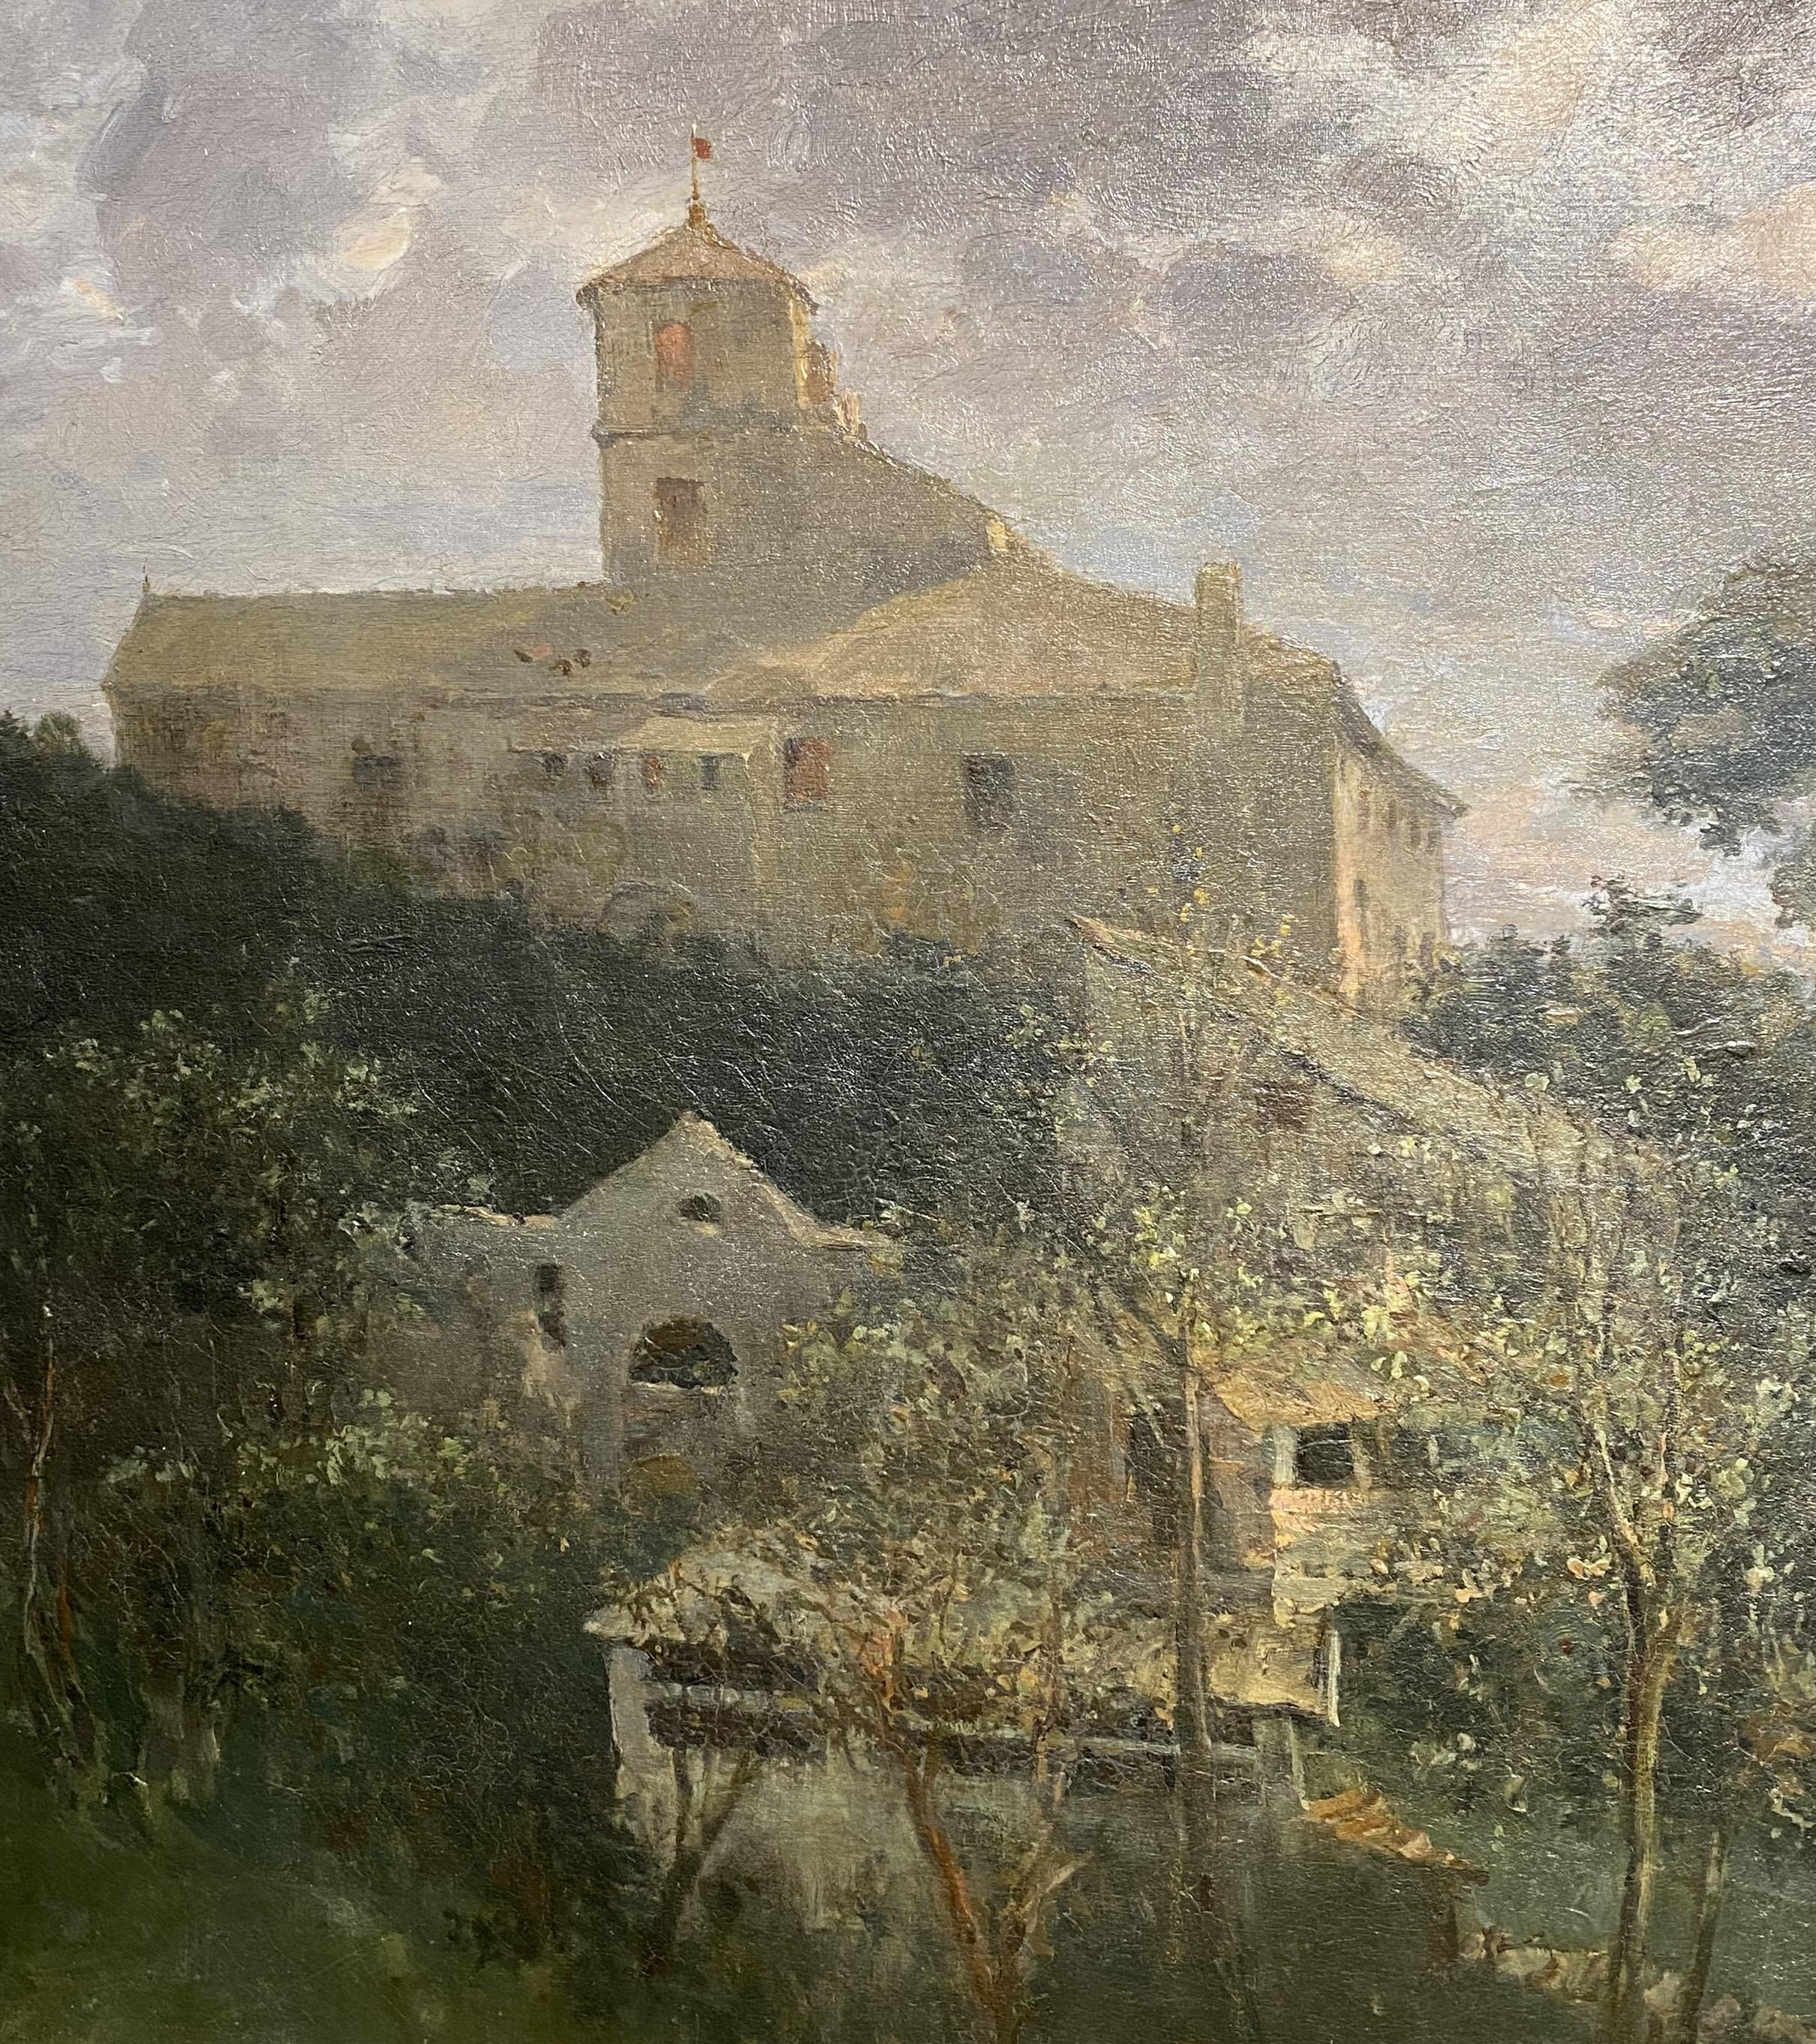 An exceptional  Italian landscape by American artist Ross Sterling Turner (1847-1915). Turner was born in Westport, New York, and after moving to Alexandria, Virginia, took his first job as a mechanical draftsman at the U.S. Patent Office in